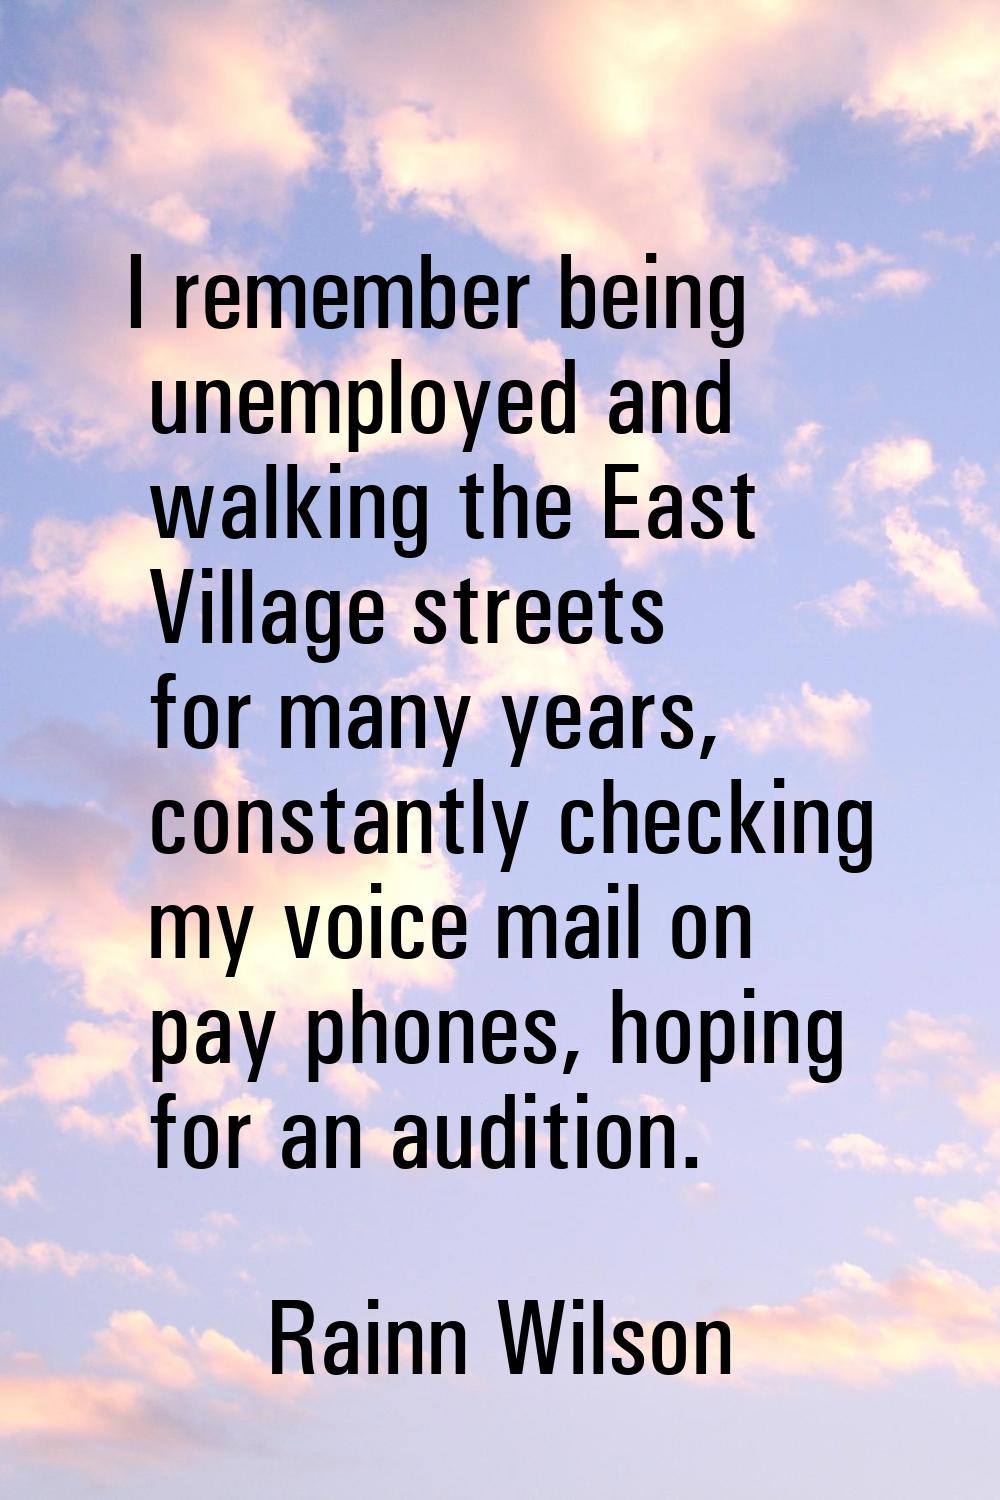 I remember being unemployed and walking the East Village streets for many years, constantly checkin